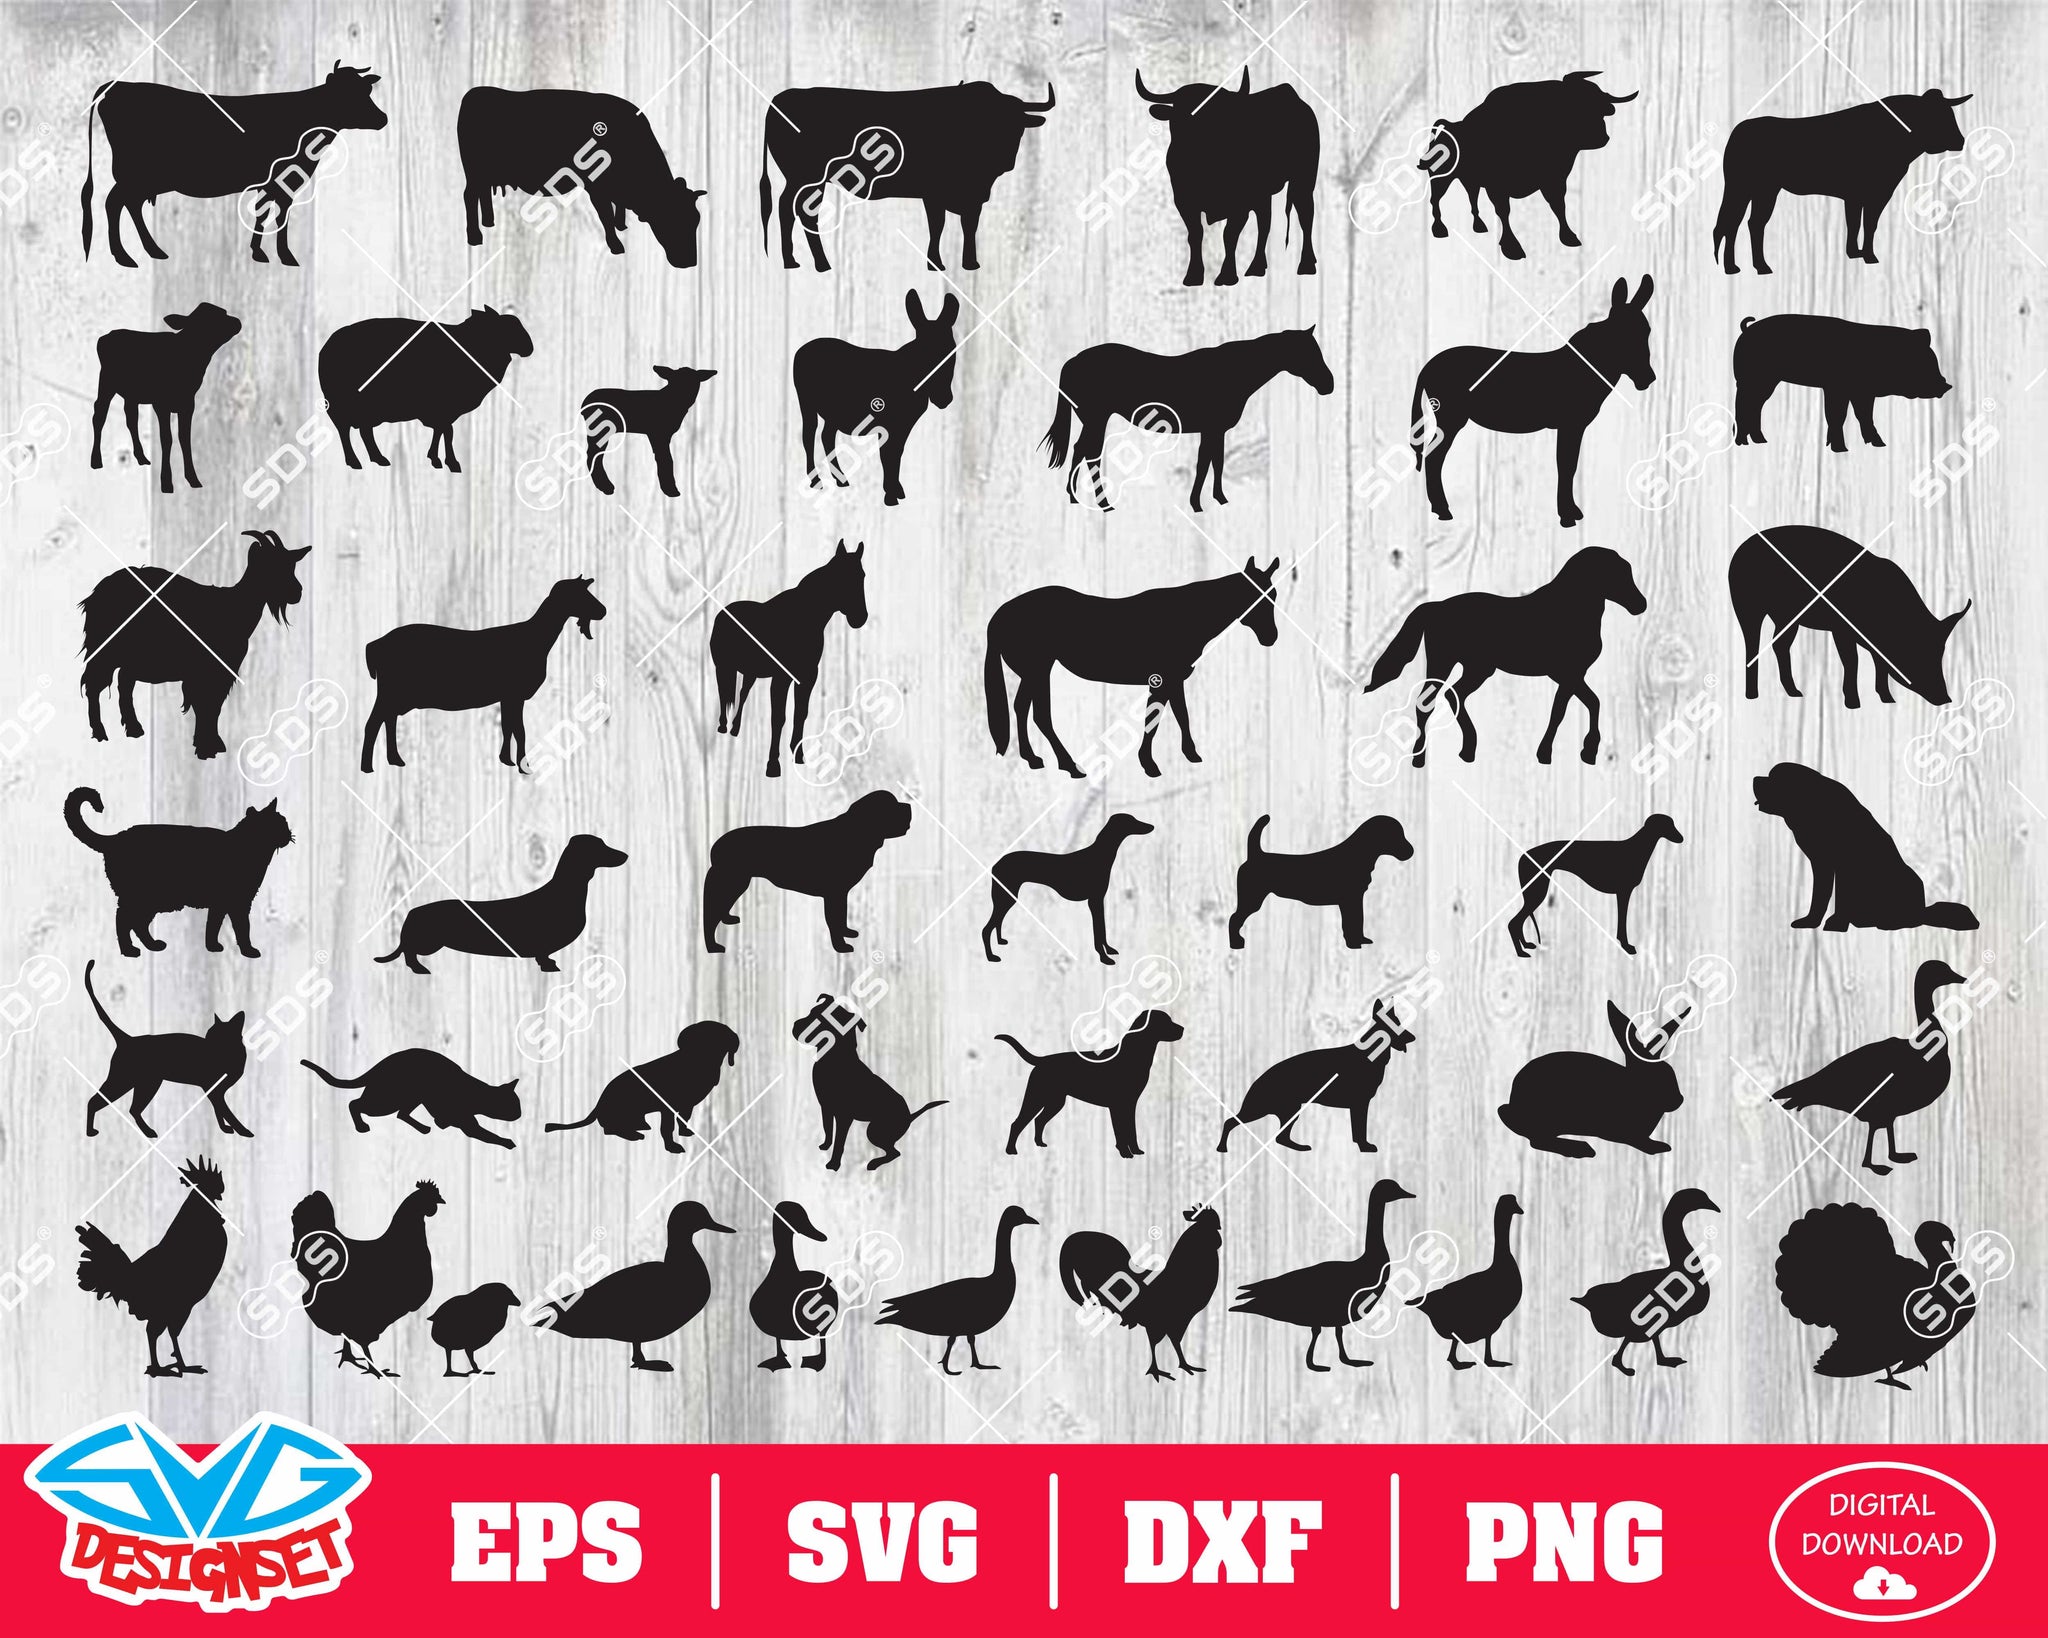 Farm animals Svg, Dxf, Eps, Png, Clipart and cut file